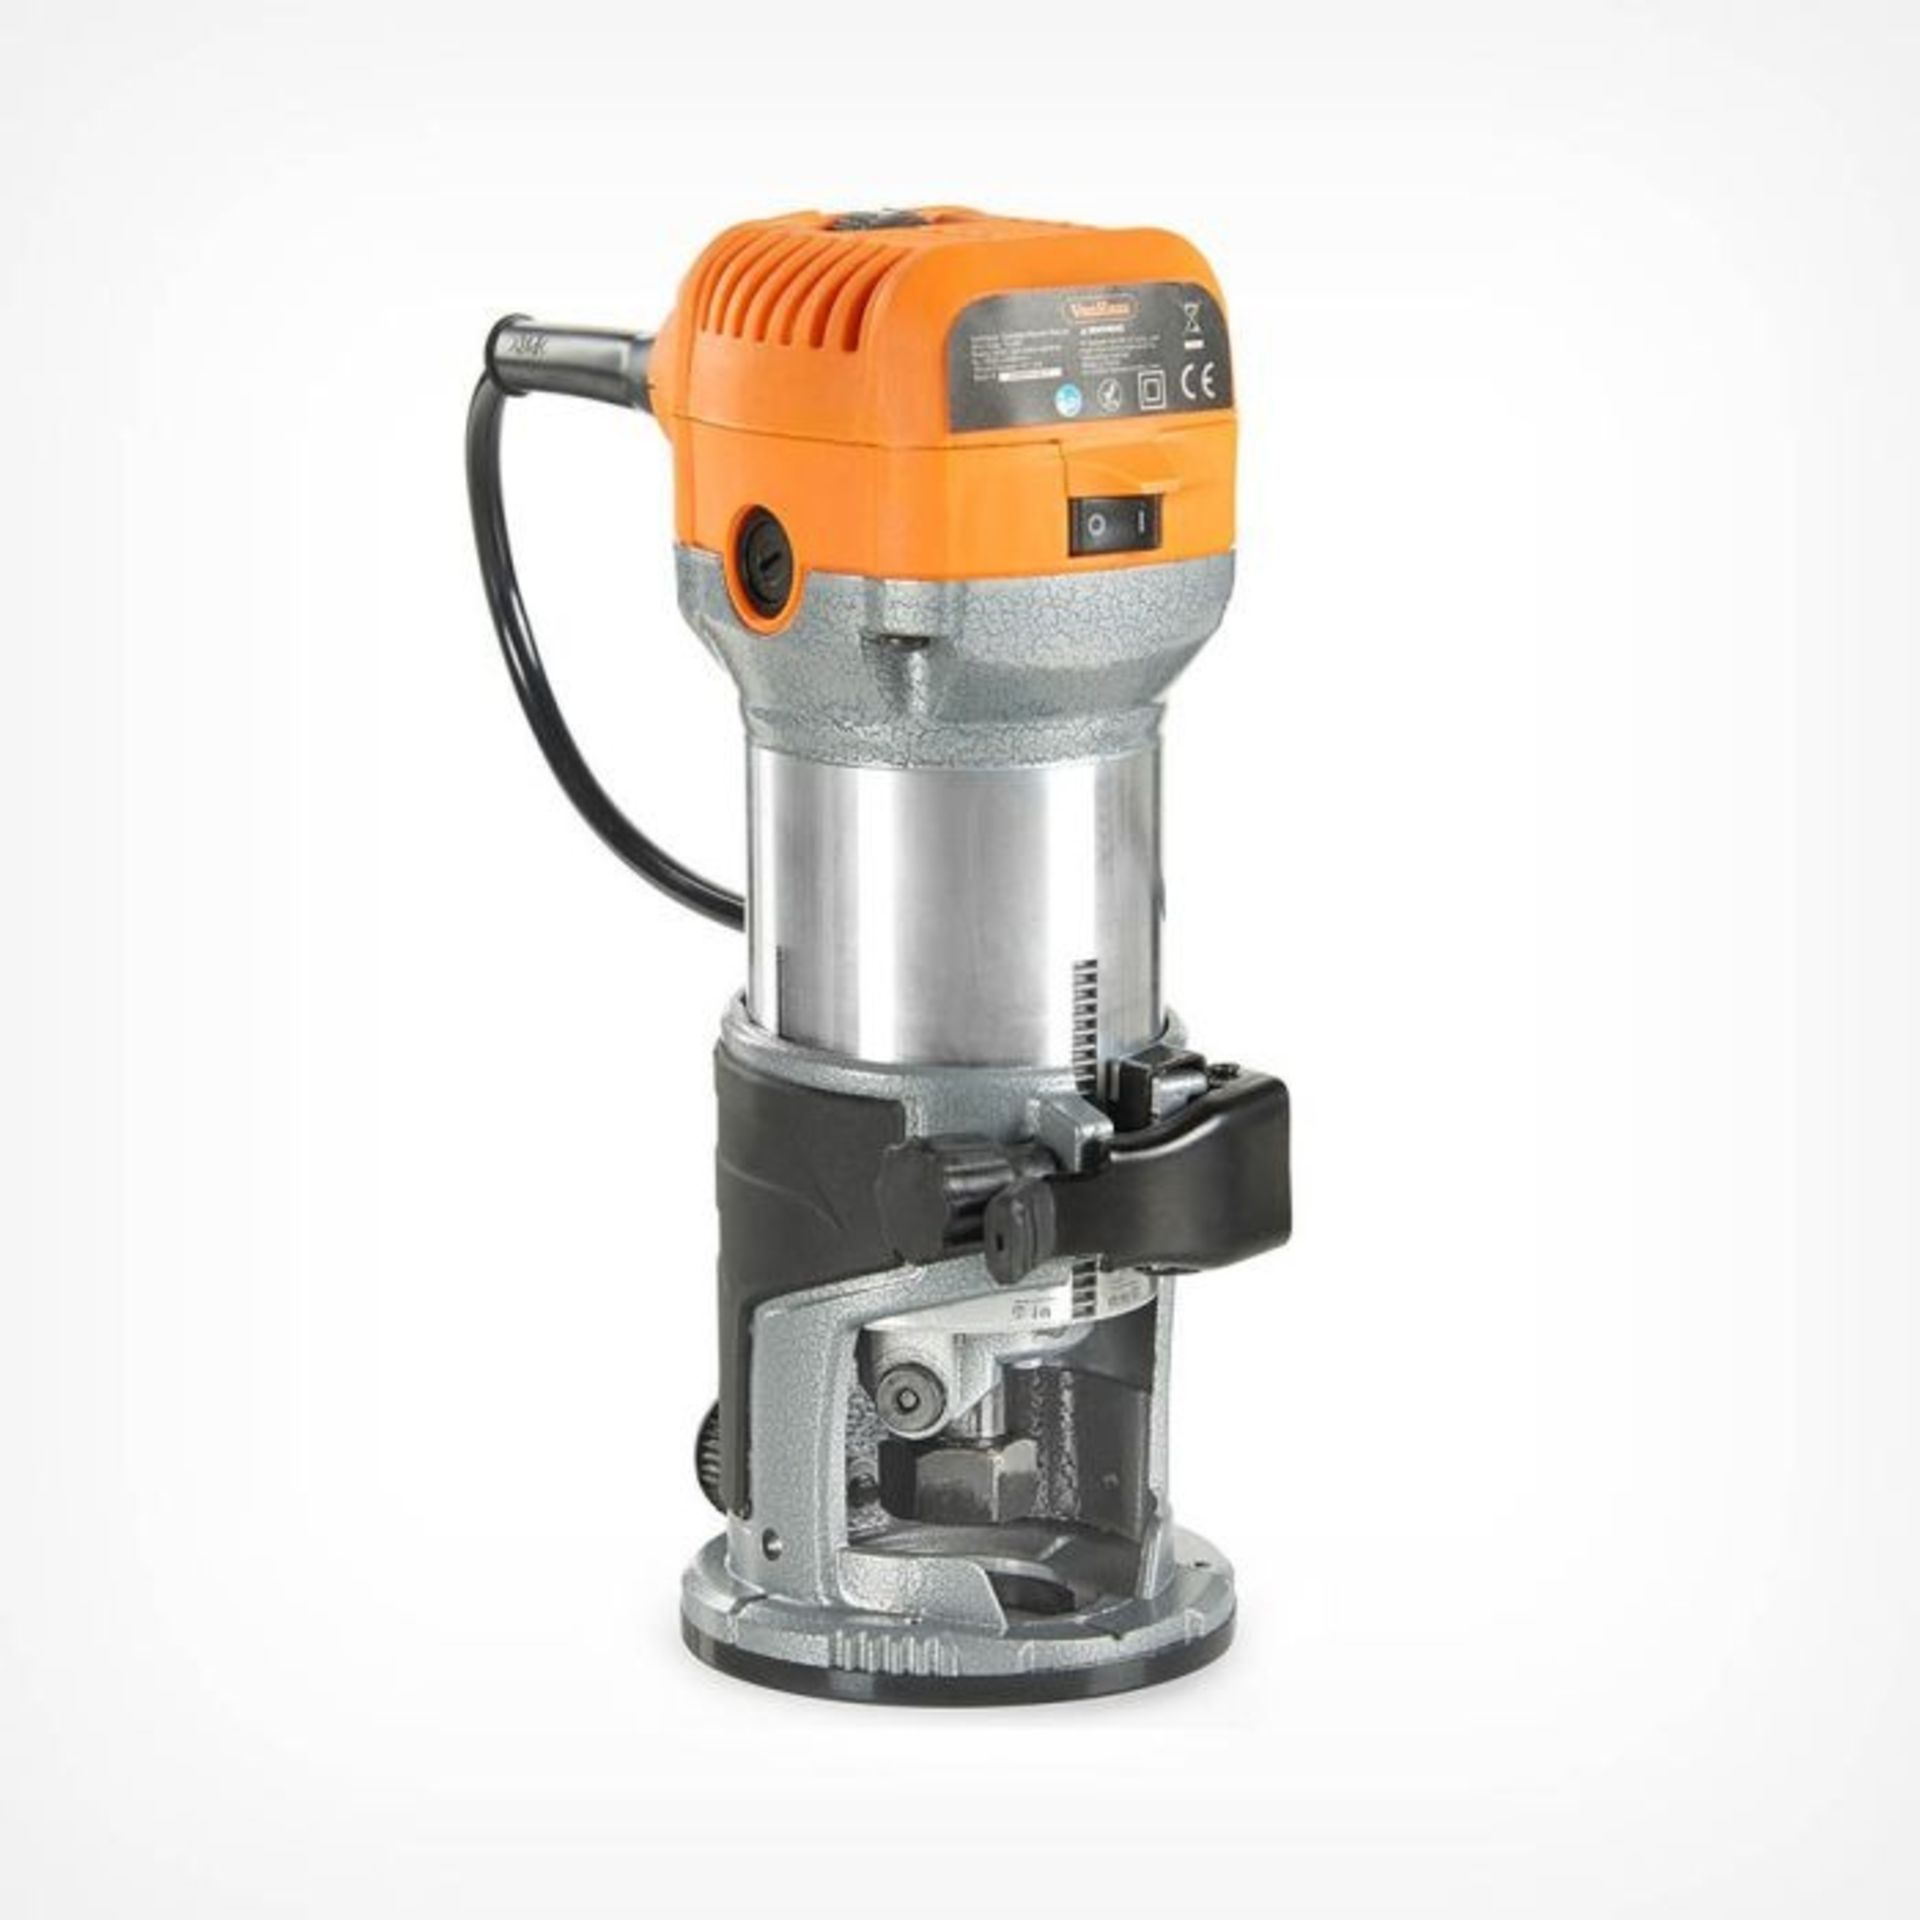 Compact Palm Router Saw - ER37